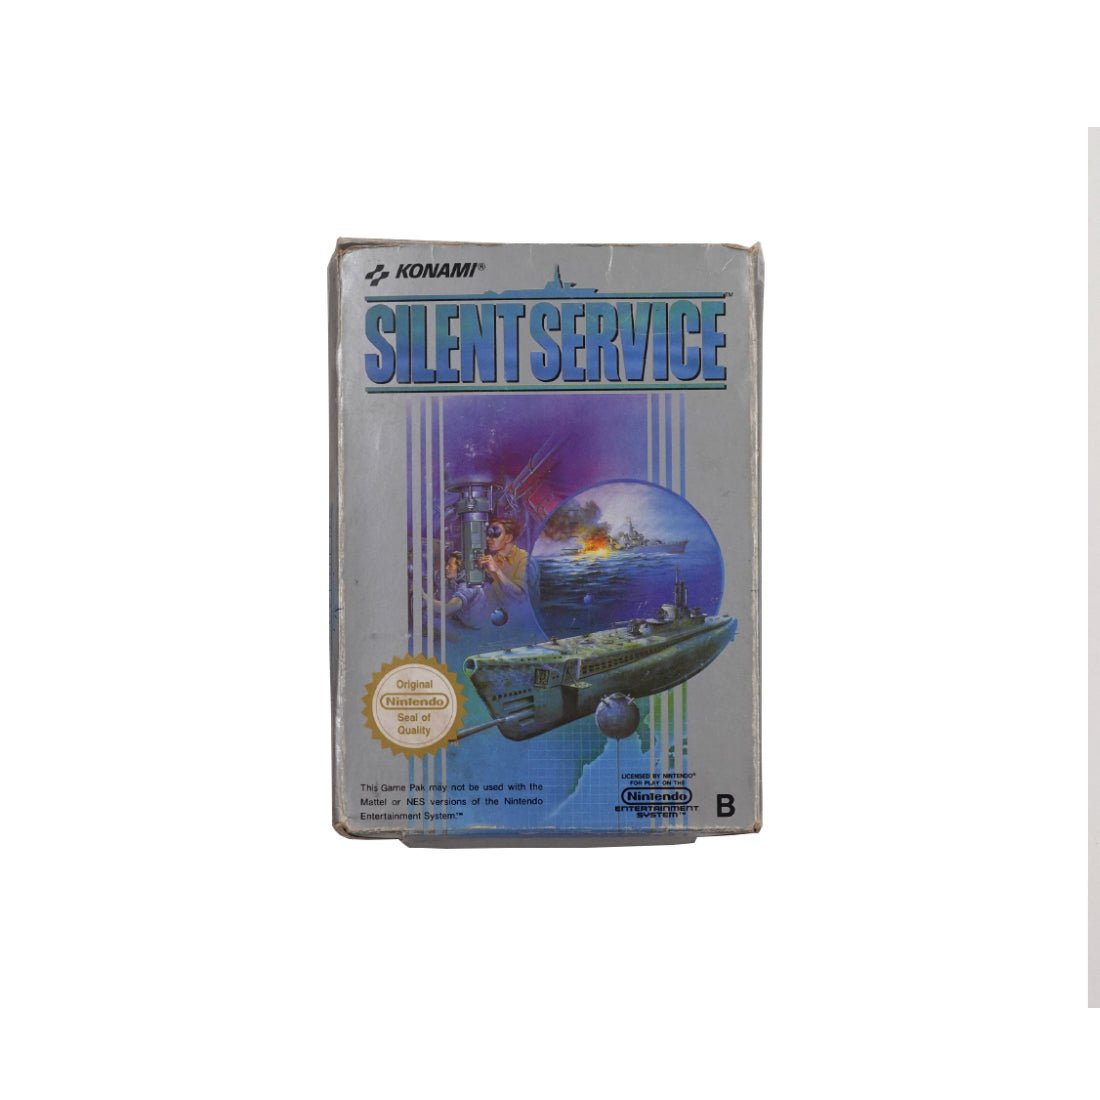 (Pre-Owned) Silent Service - Nintendo Entertainment System - Store 974 | ستور ٩٧٤